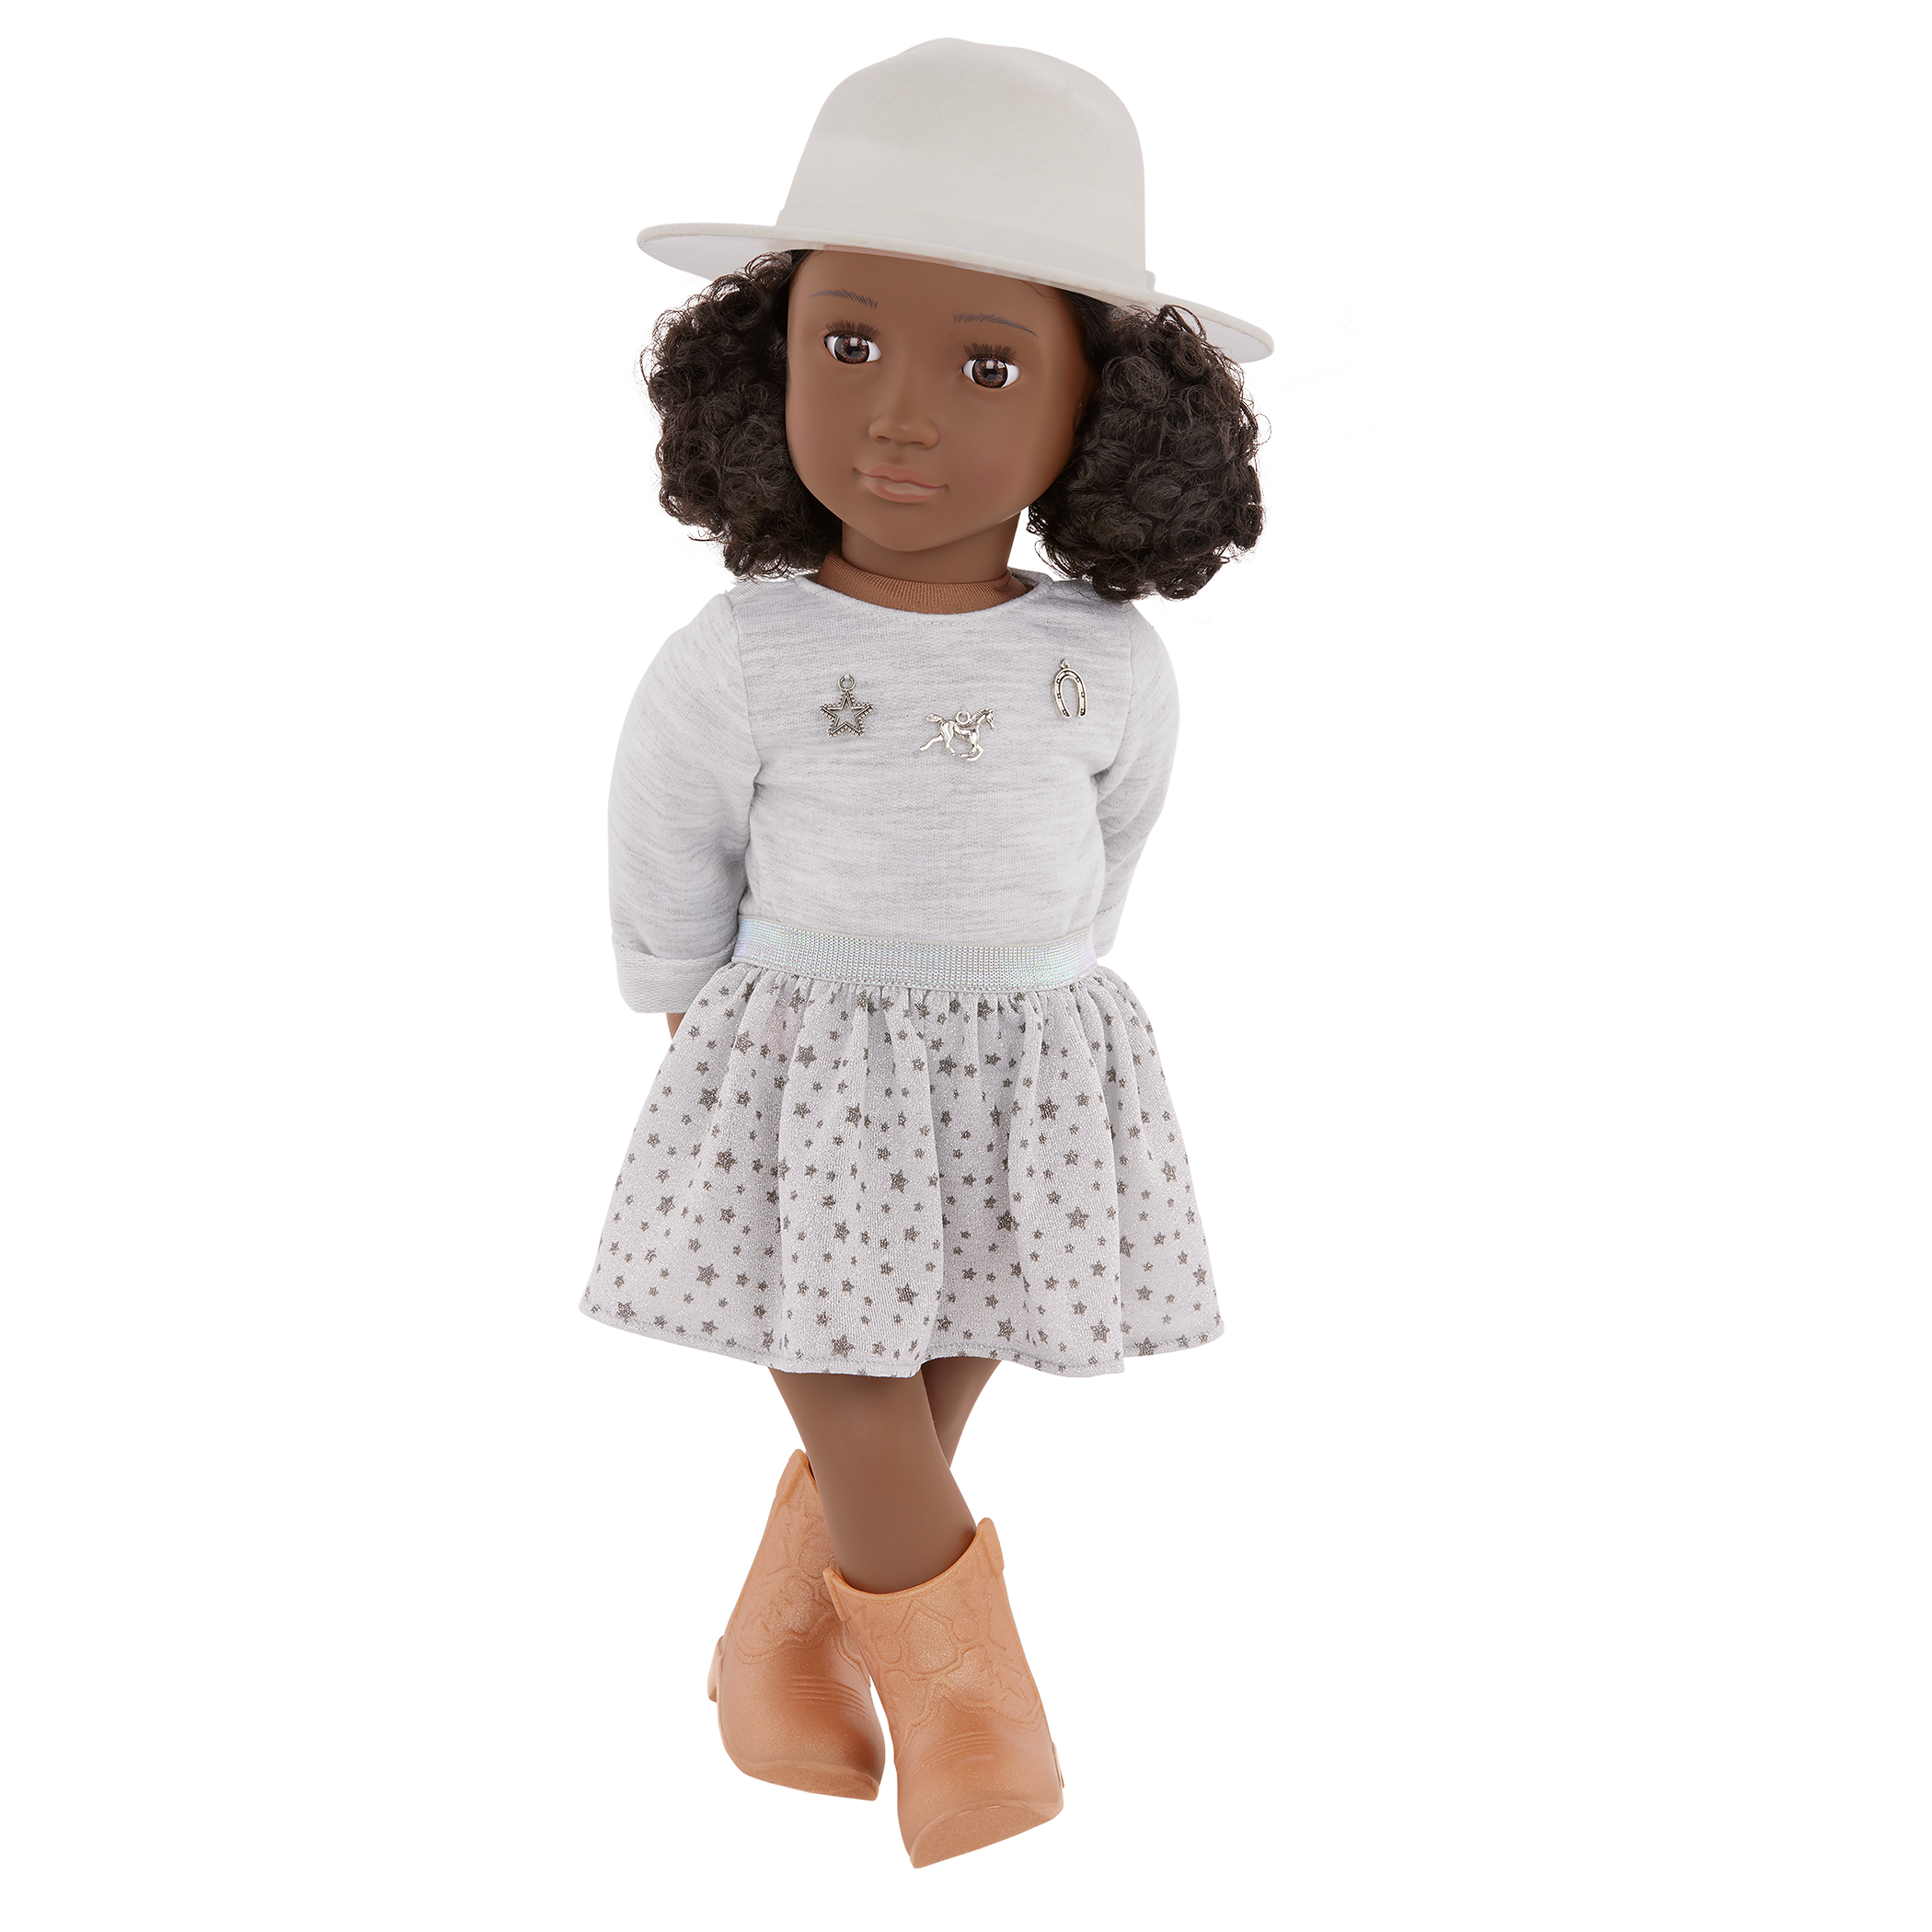 Our Generation 18" Doll Victoria in Cowgirl Outfit including sweater, skirt, boots and hat